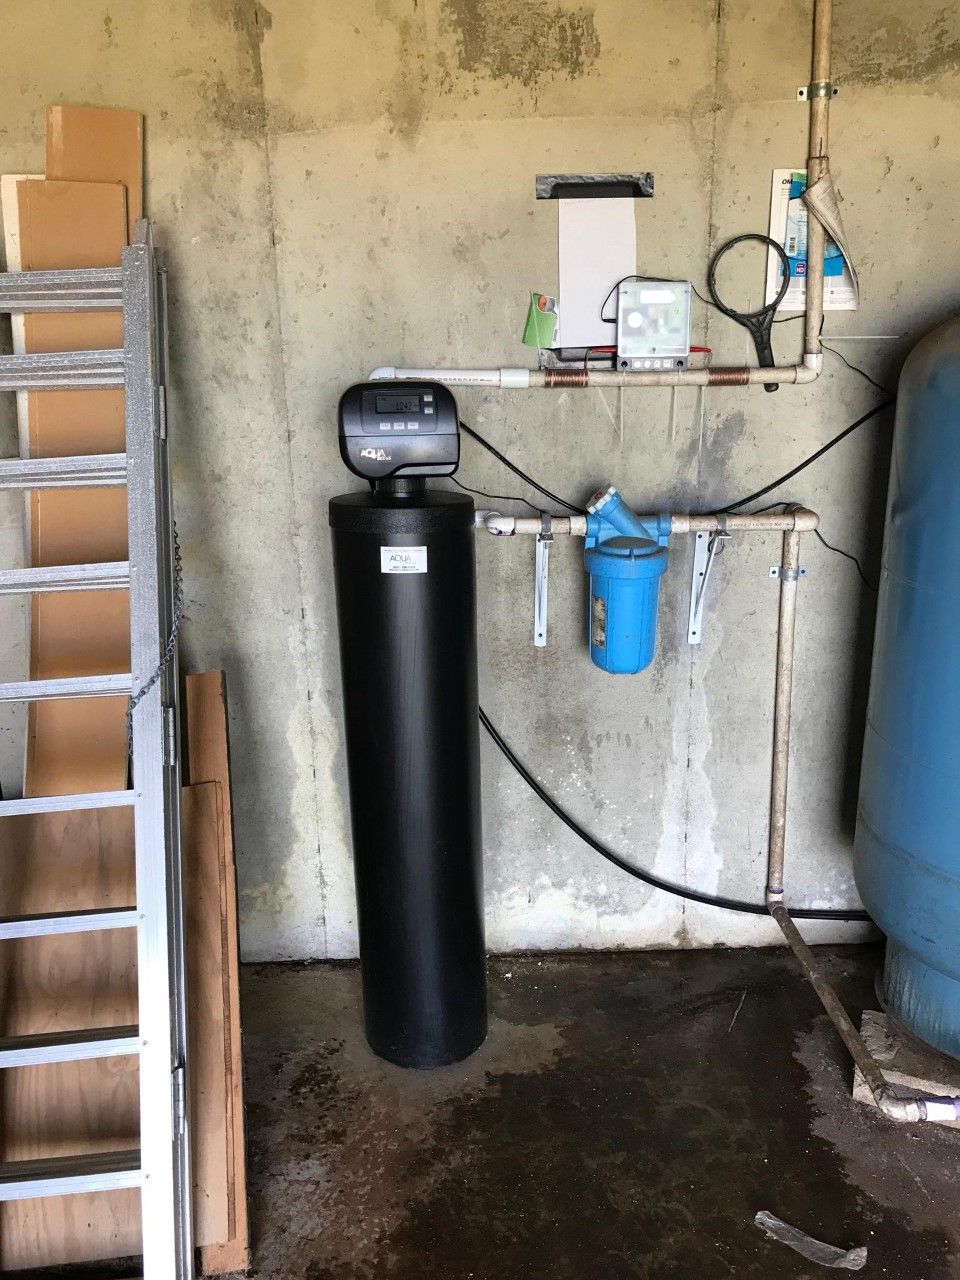 water softener 
hard water 
water filter
whole home water filter 
